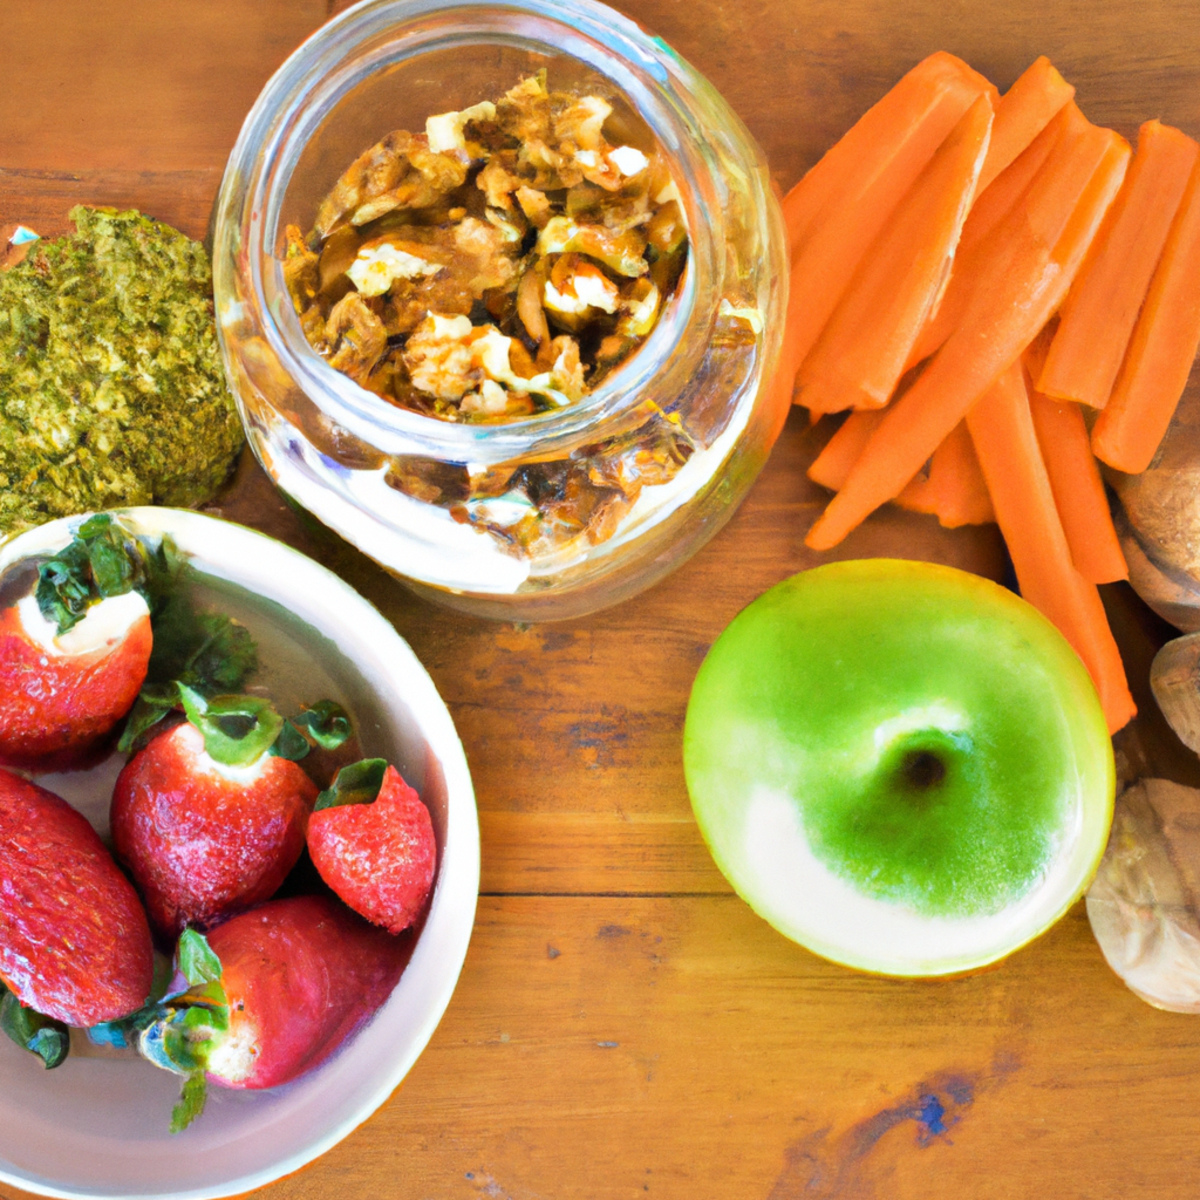 A wooden table with fresh fruits, veggies, nuts, bread, tea, and a mindfulness book. A peaceful scene promoting holistic nutrition and stress management.